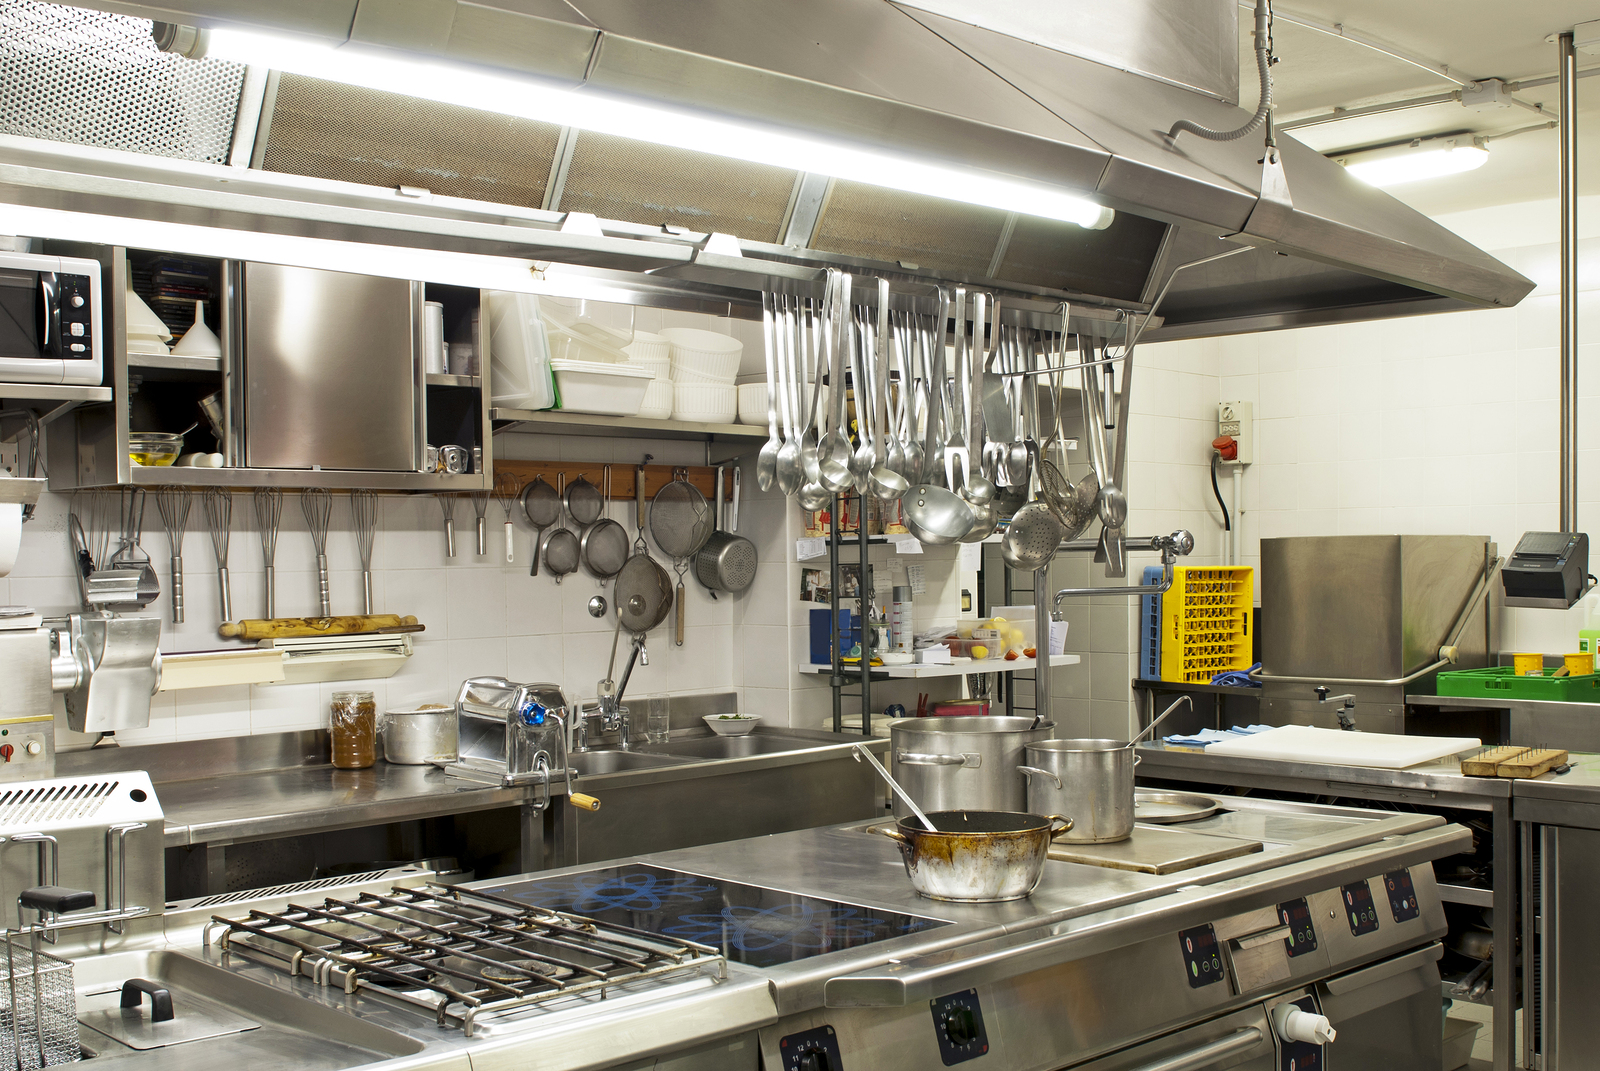 Keeping a Cleaner Commercial Kitchen